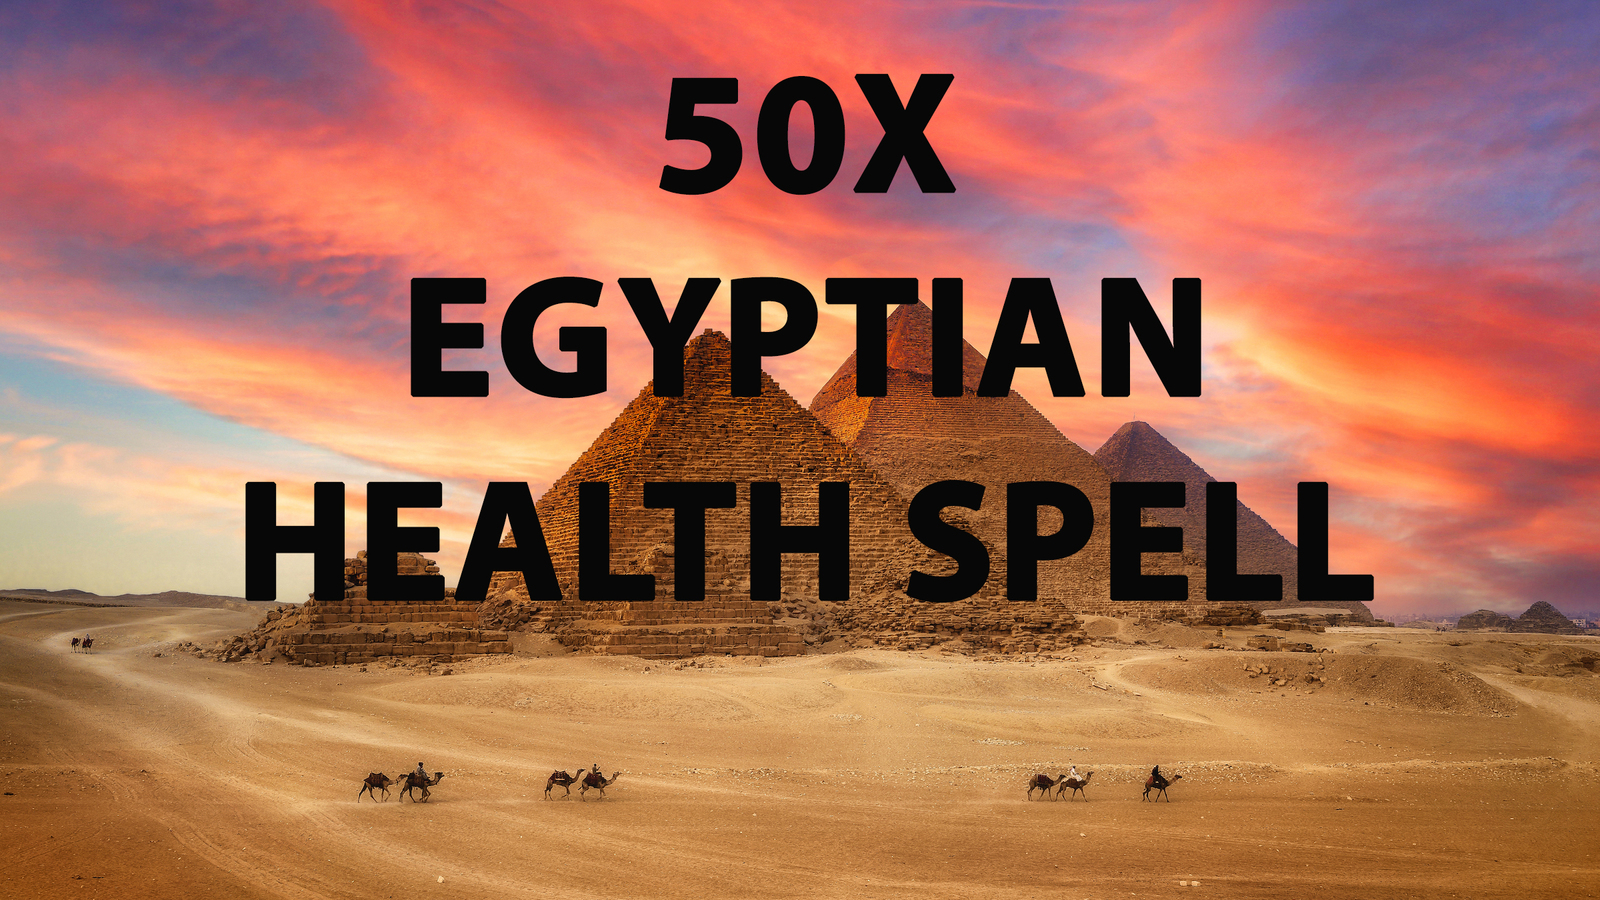 50X FULL COVEN EGYPTIAN PAPRYI HEALING WELLNESS MAGICK CEREMONY Witch ALBINA